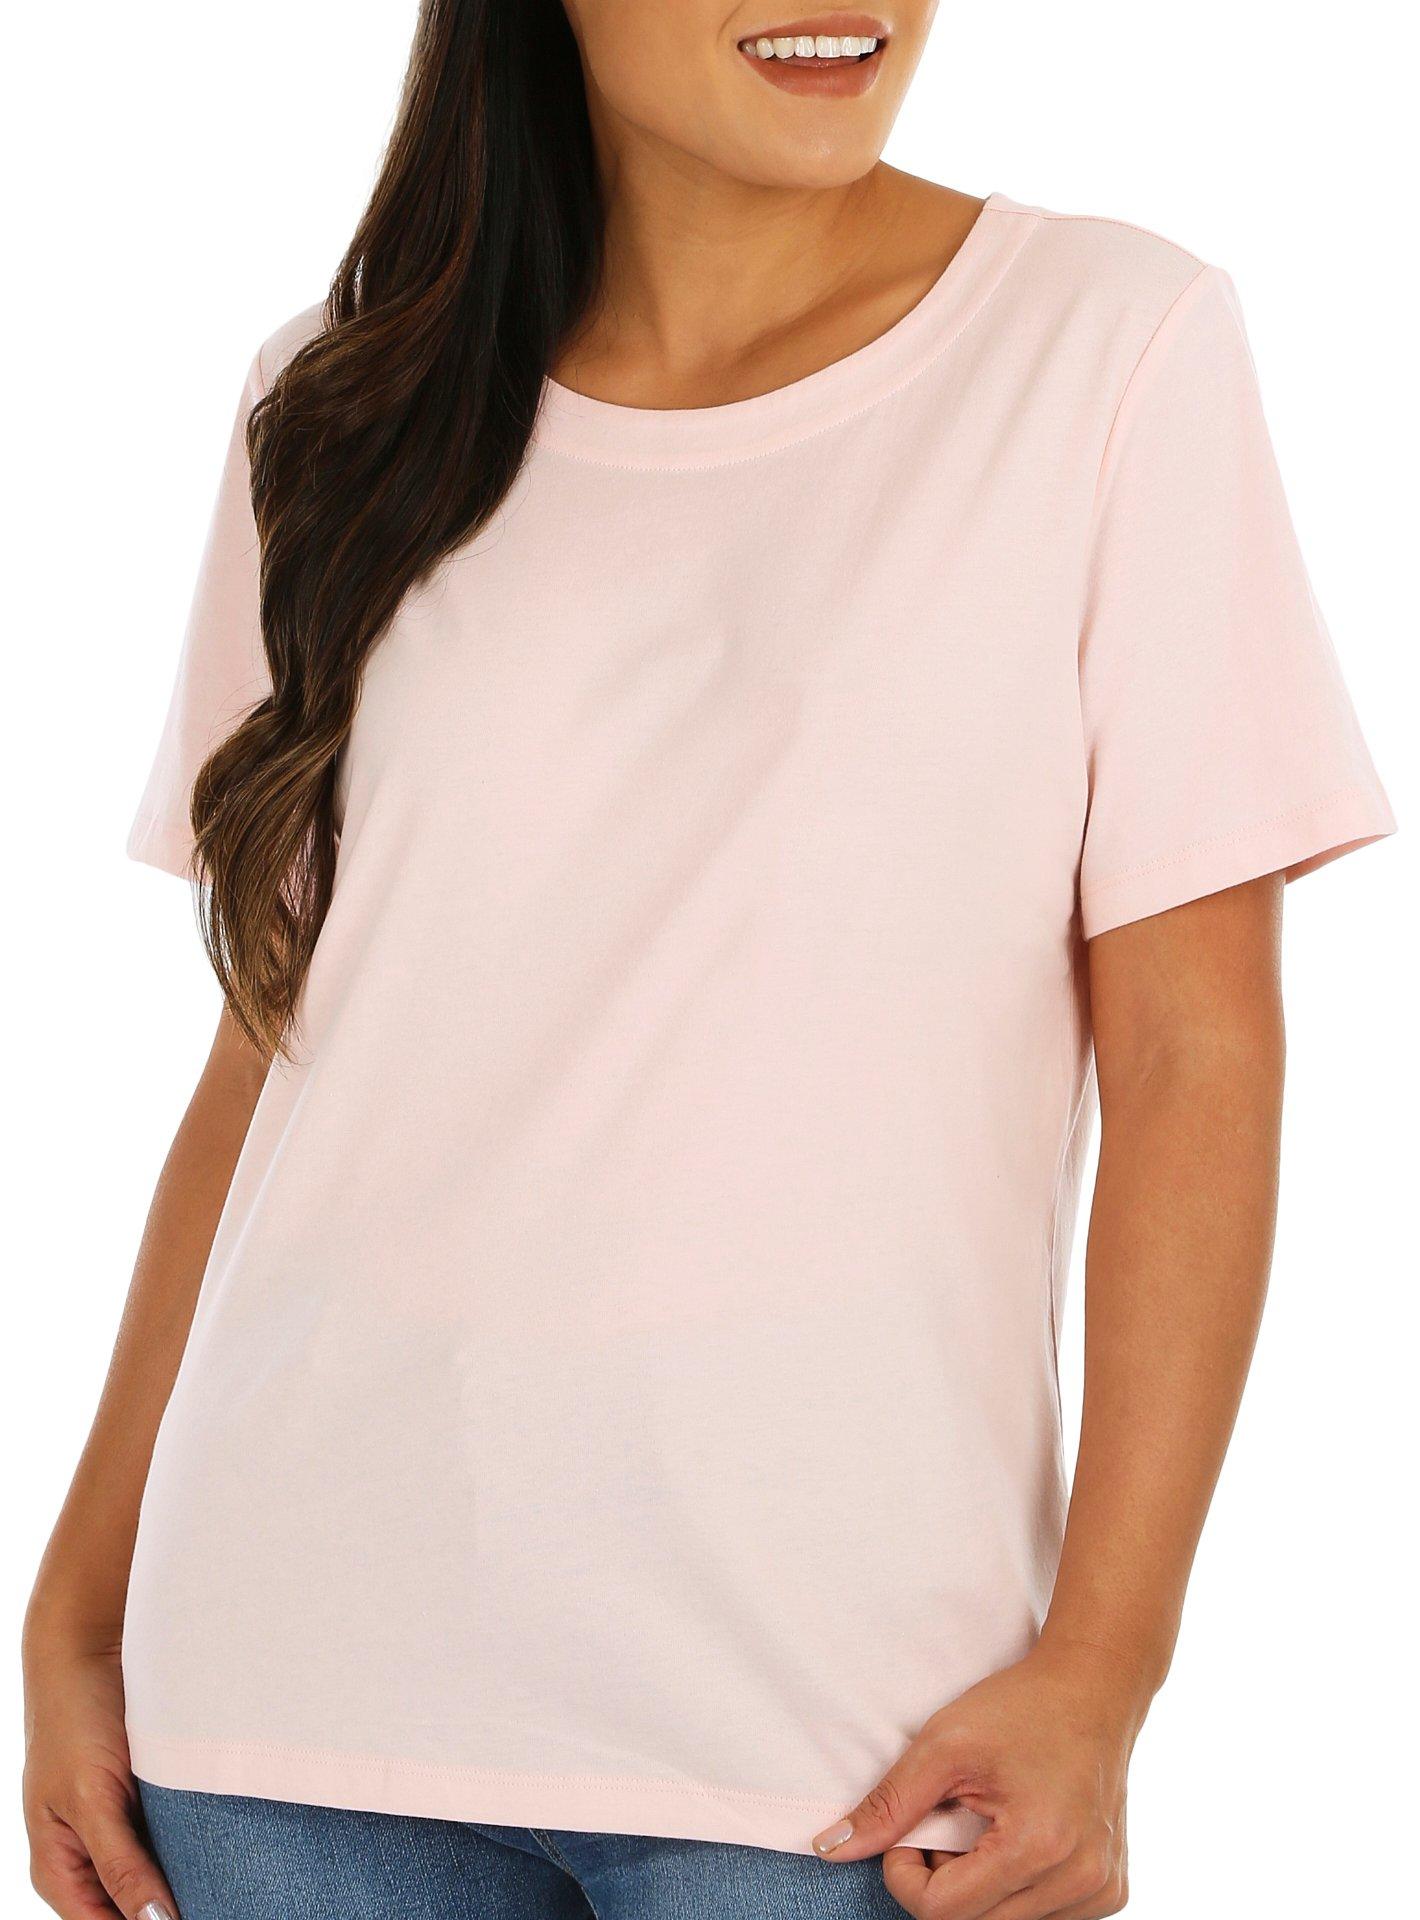 Coral Bay Womens Wide Scoop Neck Short Sleeve